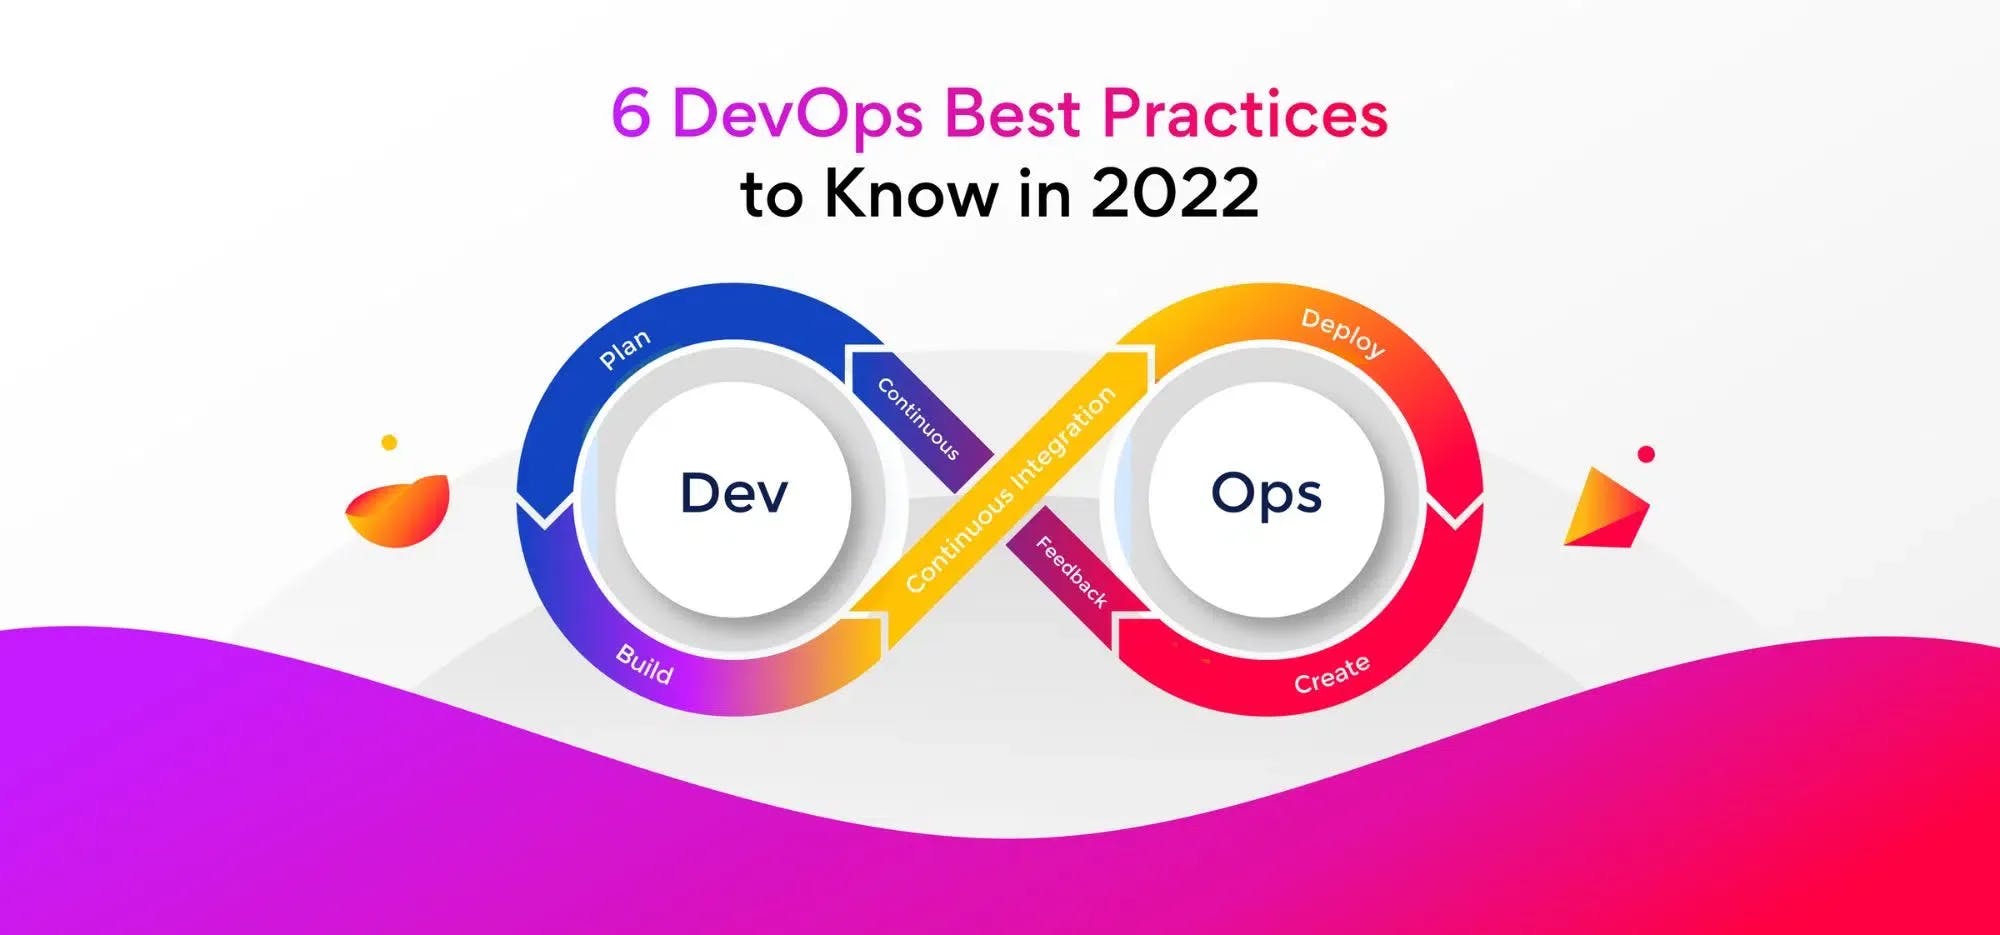 You Must Know These 6 DevOps Best Practices